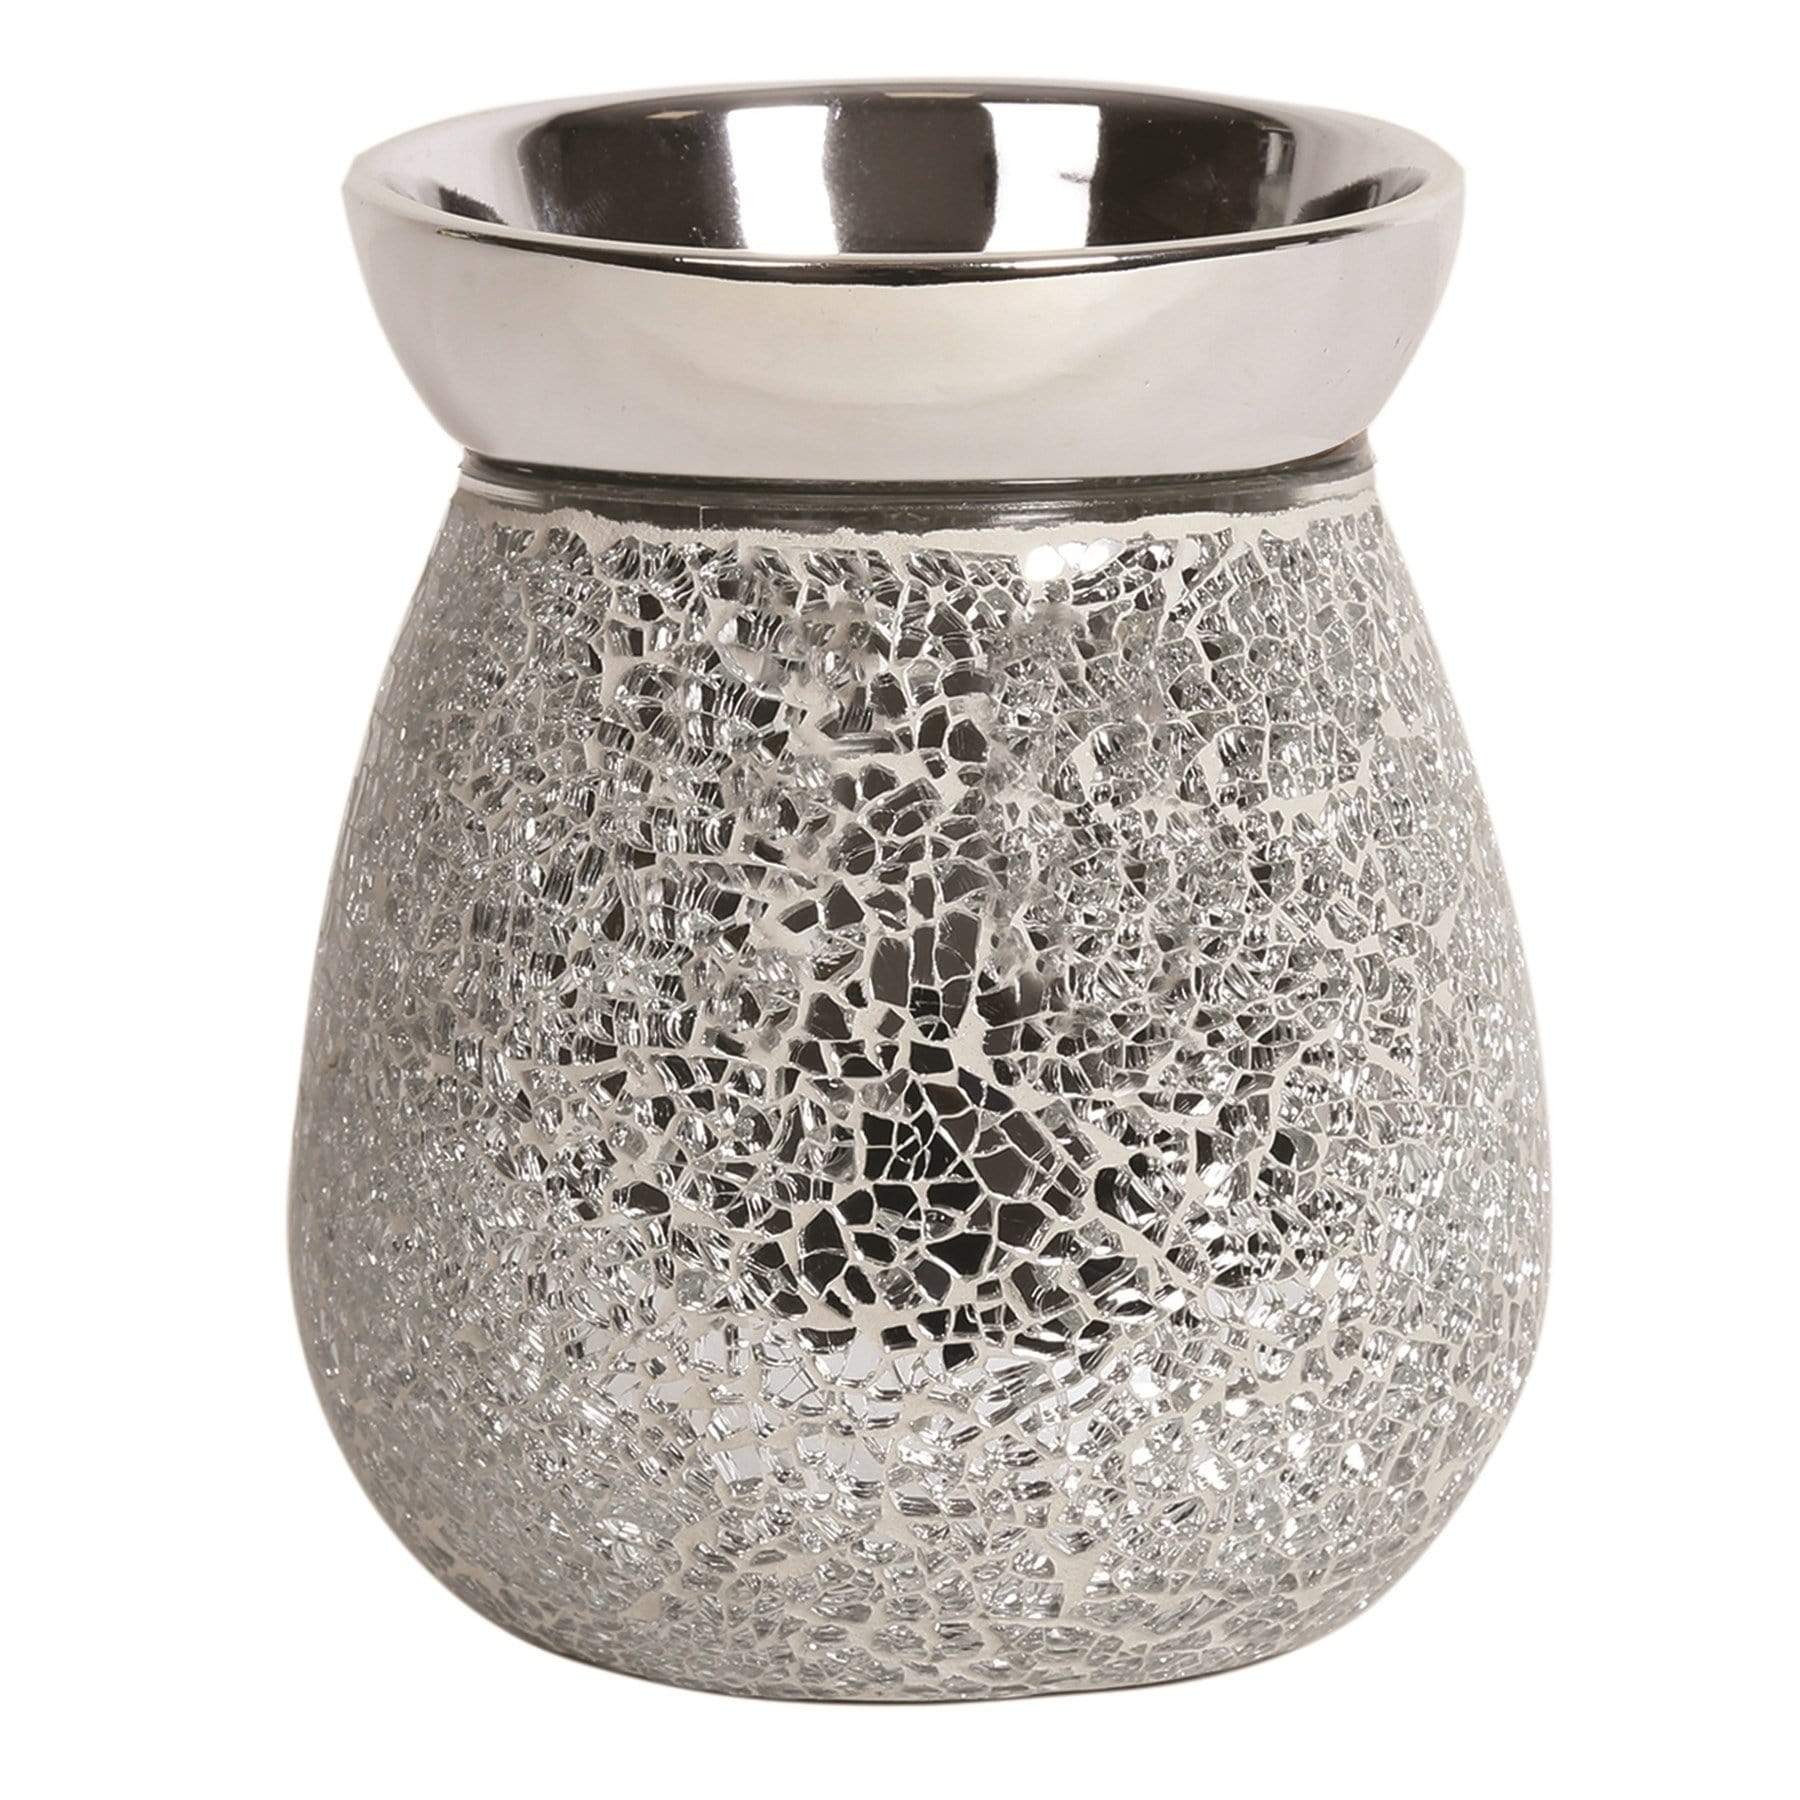 Aroma Accessories Electric Melt Warmer Aroma Accessories Electric Wax Melt Burner - Silver Crackle